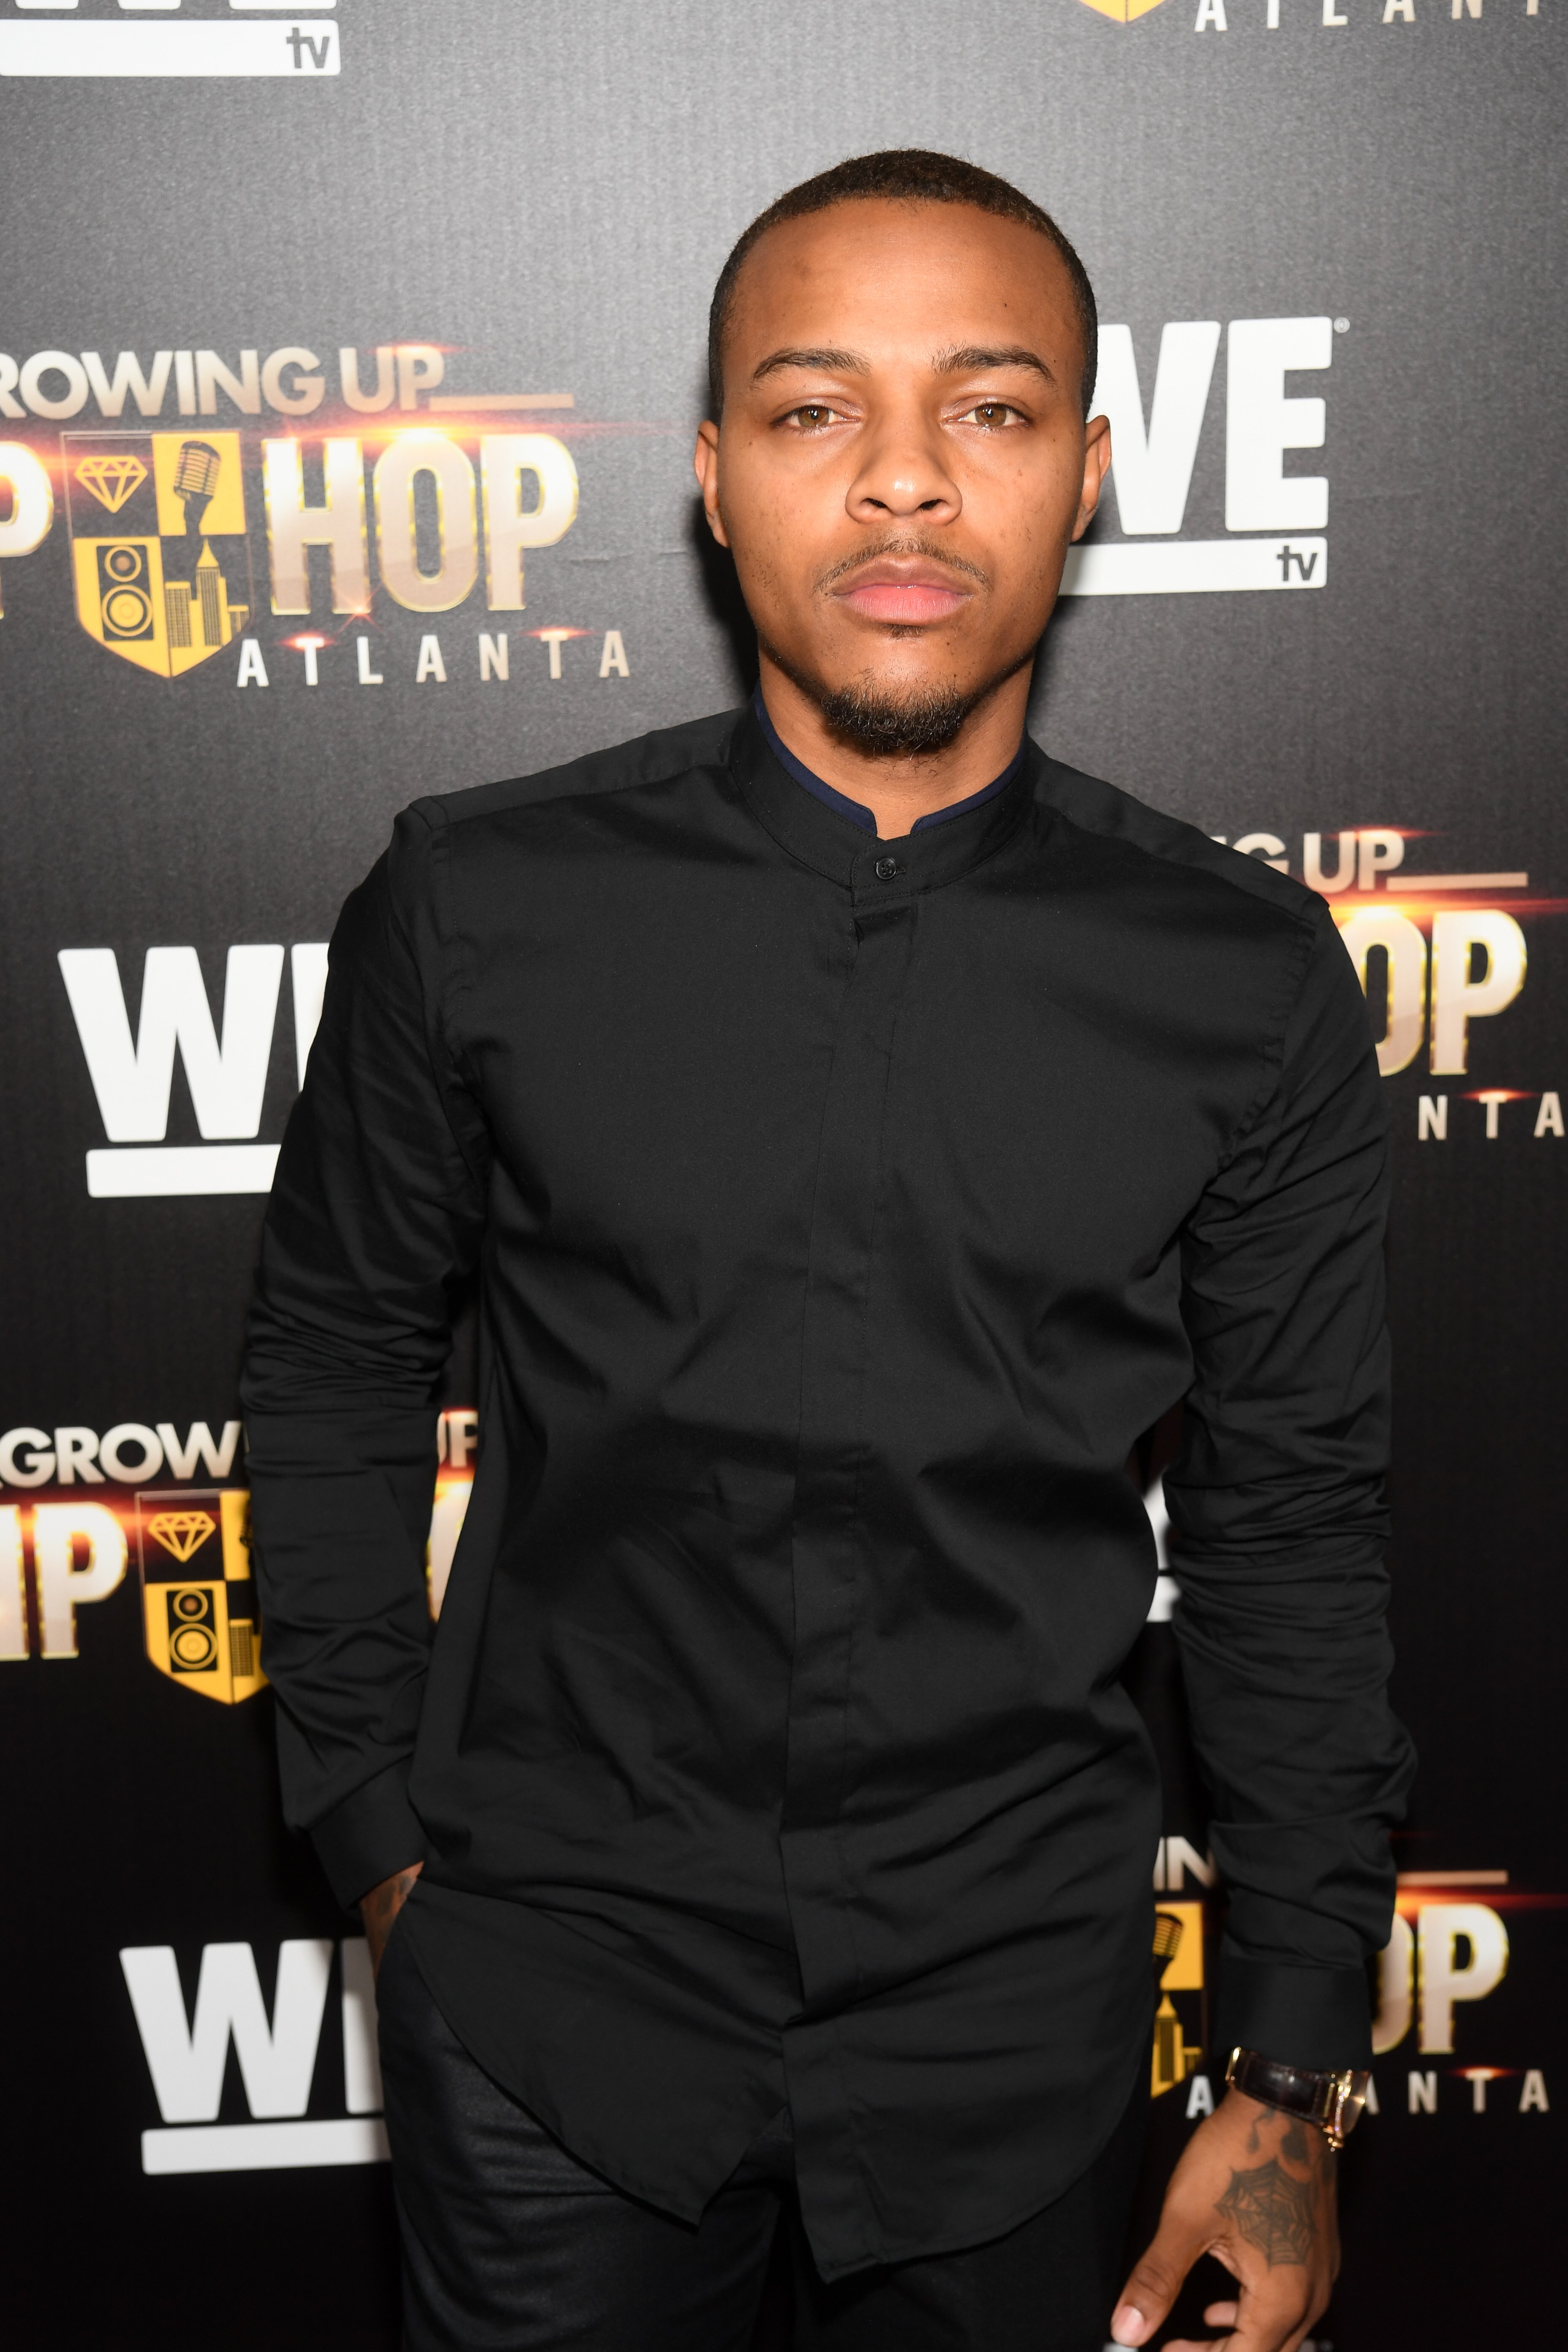 Bow Wow at the WE TV's "Growing Up Hip Hop: Atlanta" premiere screening event on May 16, 2017 in New York City. | Photo: Getty Images